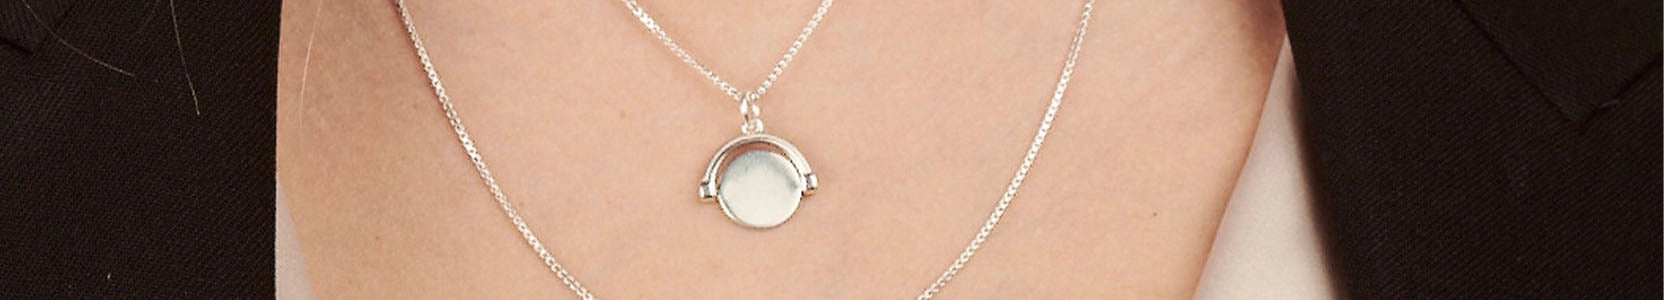 Silver spinner necklace featured in summer sale